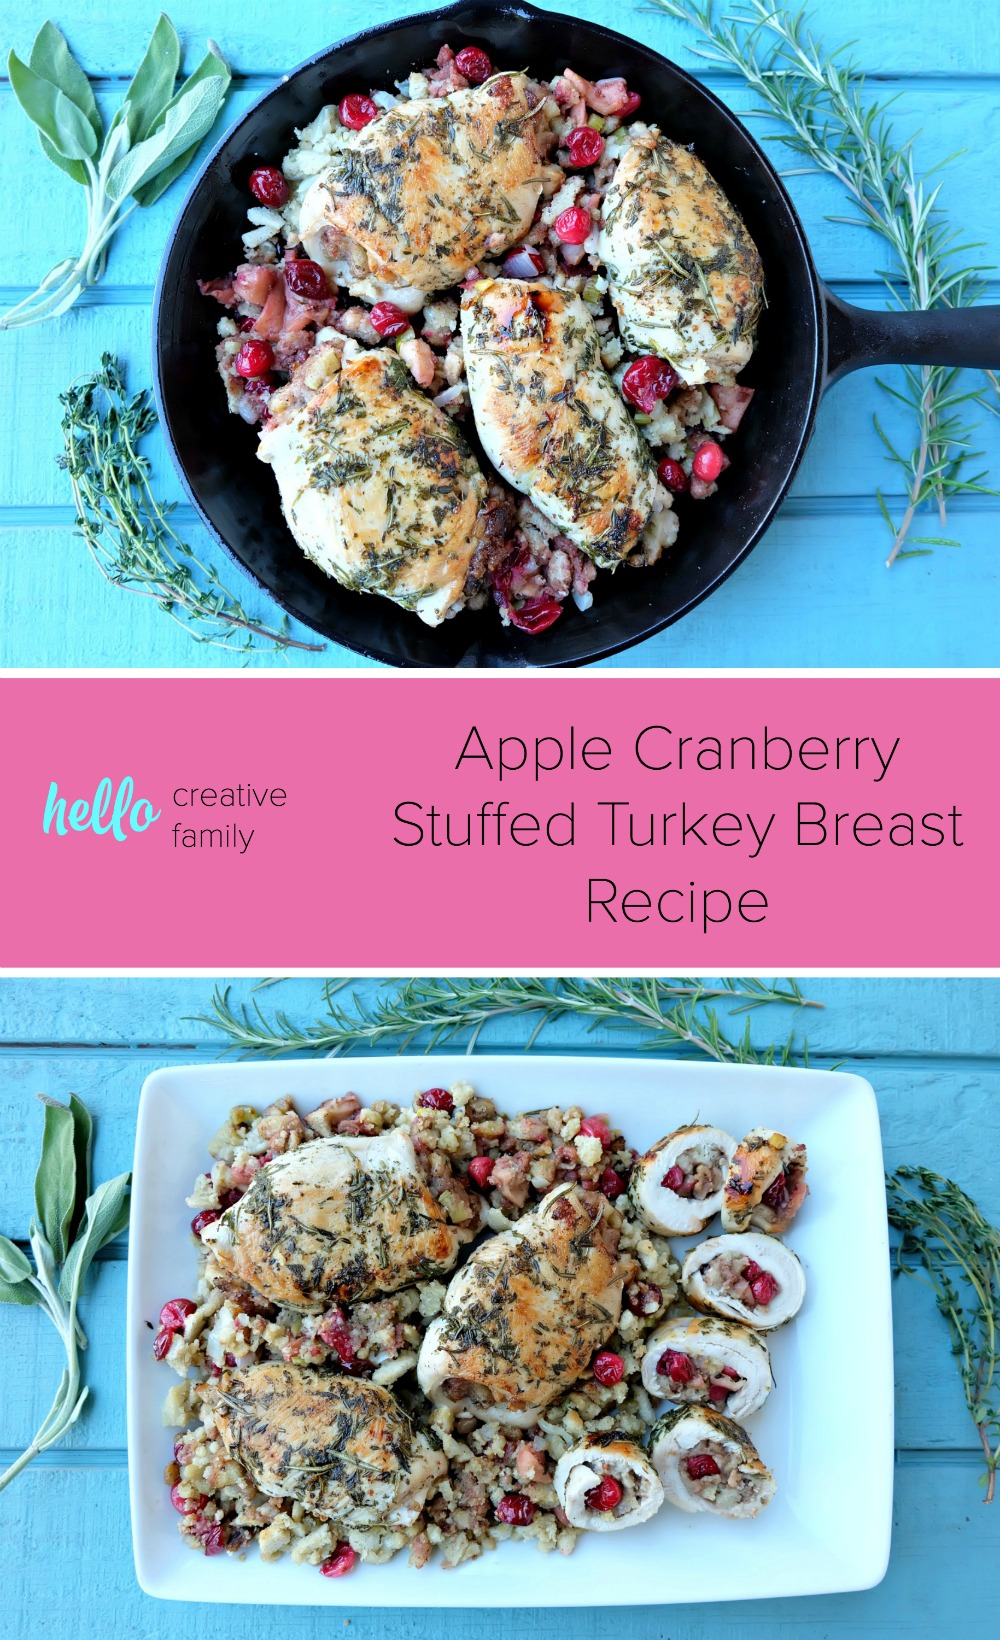 This delicious apple cranberry stuffed turkey breast recipe is perfect for a Thanksgiving meal or for a weeknight dinner! Ready in 45 minutes or less, this is a fabulous Thanksgiving dinner for two, four or more! Great for small family festivities! Recipe development #sponsored by Canadian Turkey.